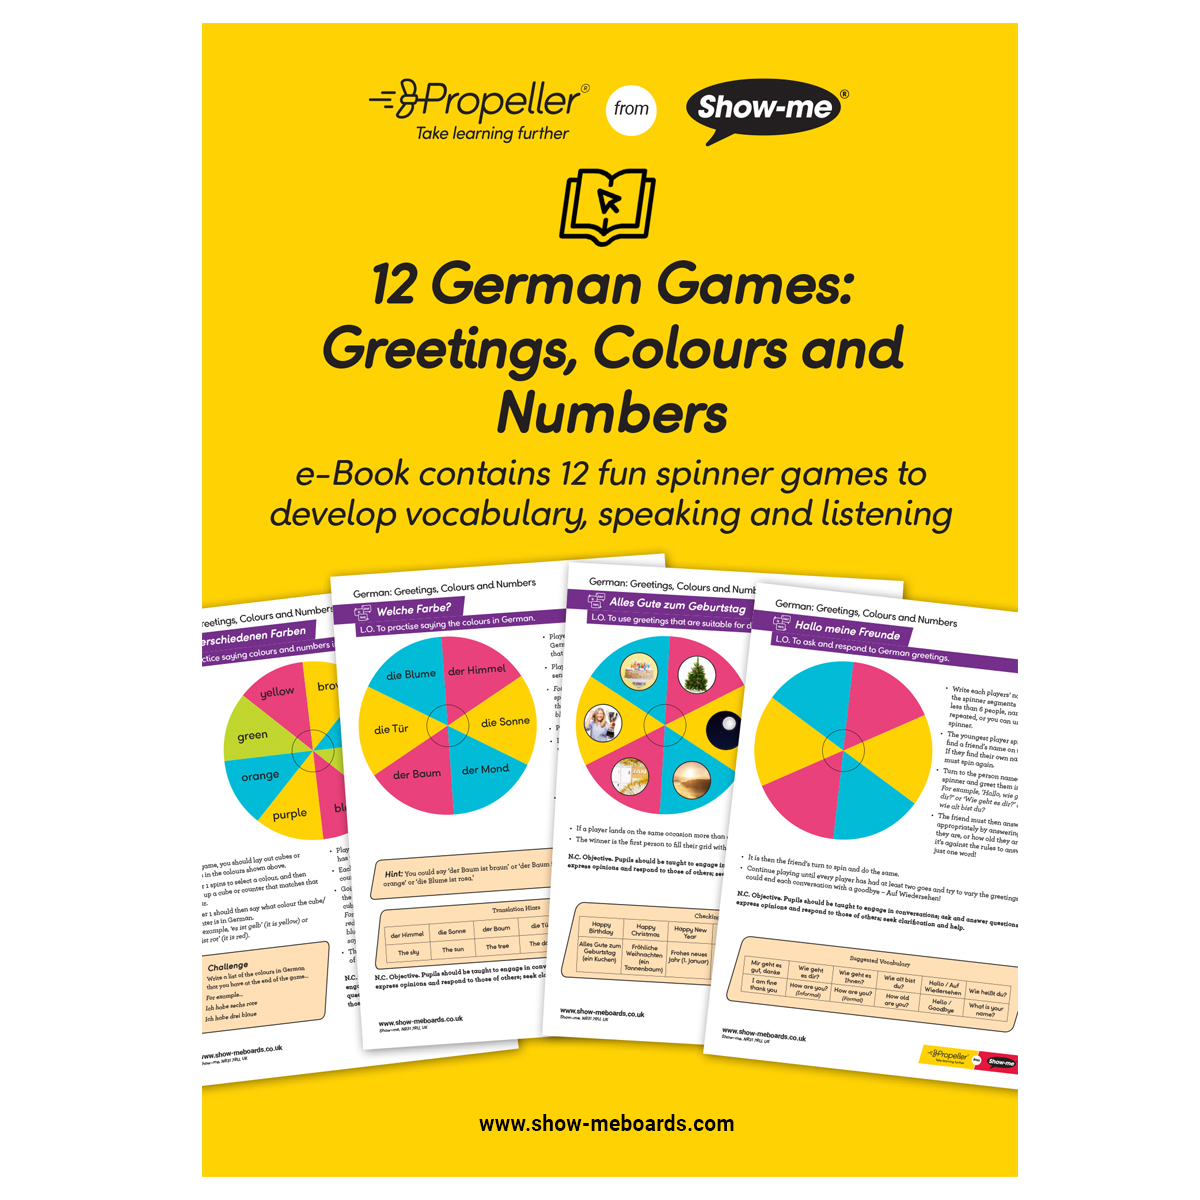 12 German Games: Greetings, Colours and Numbers – Download